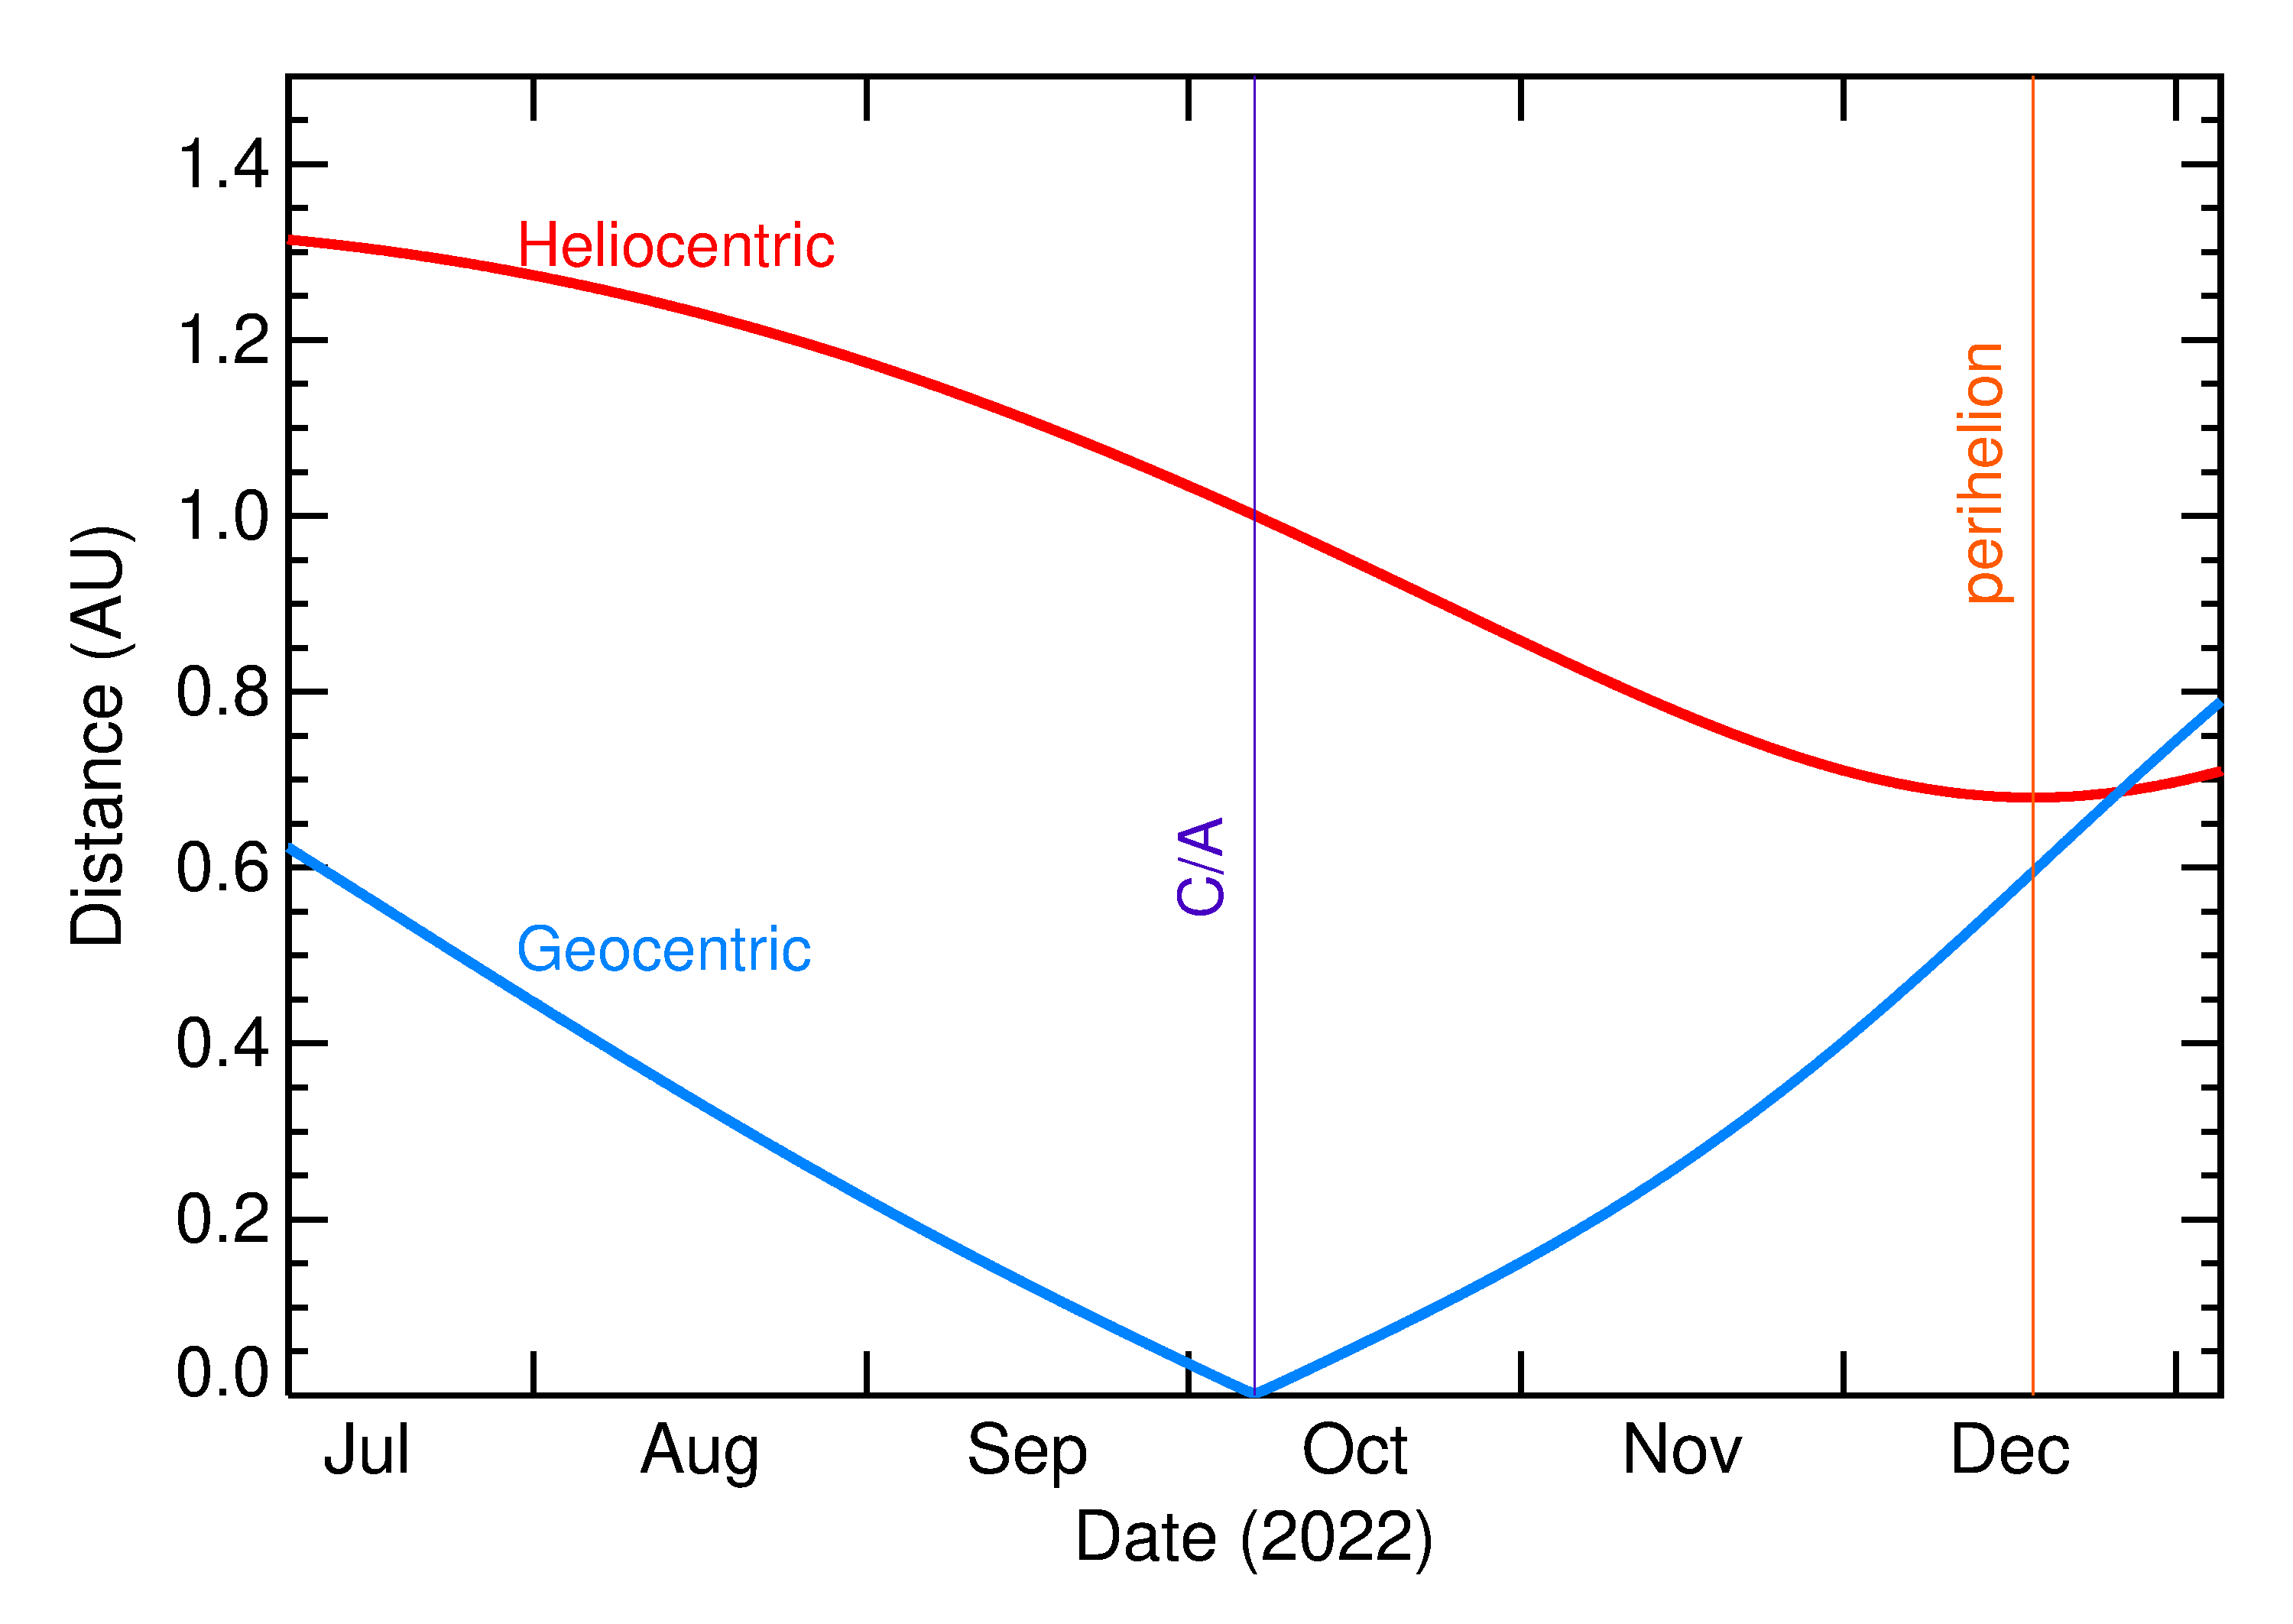 Heliocentric and Geocentric Distances of 2022 TD in the months around closest approach